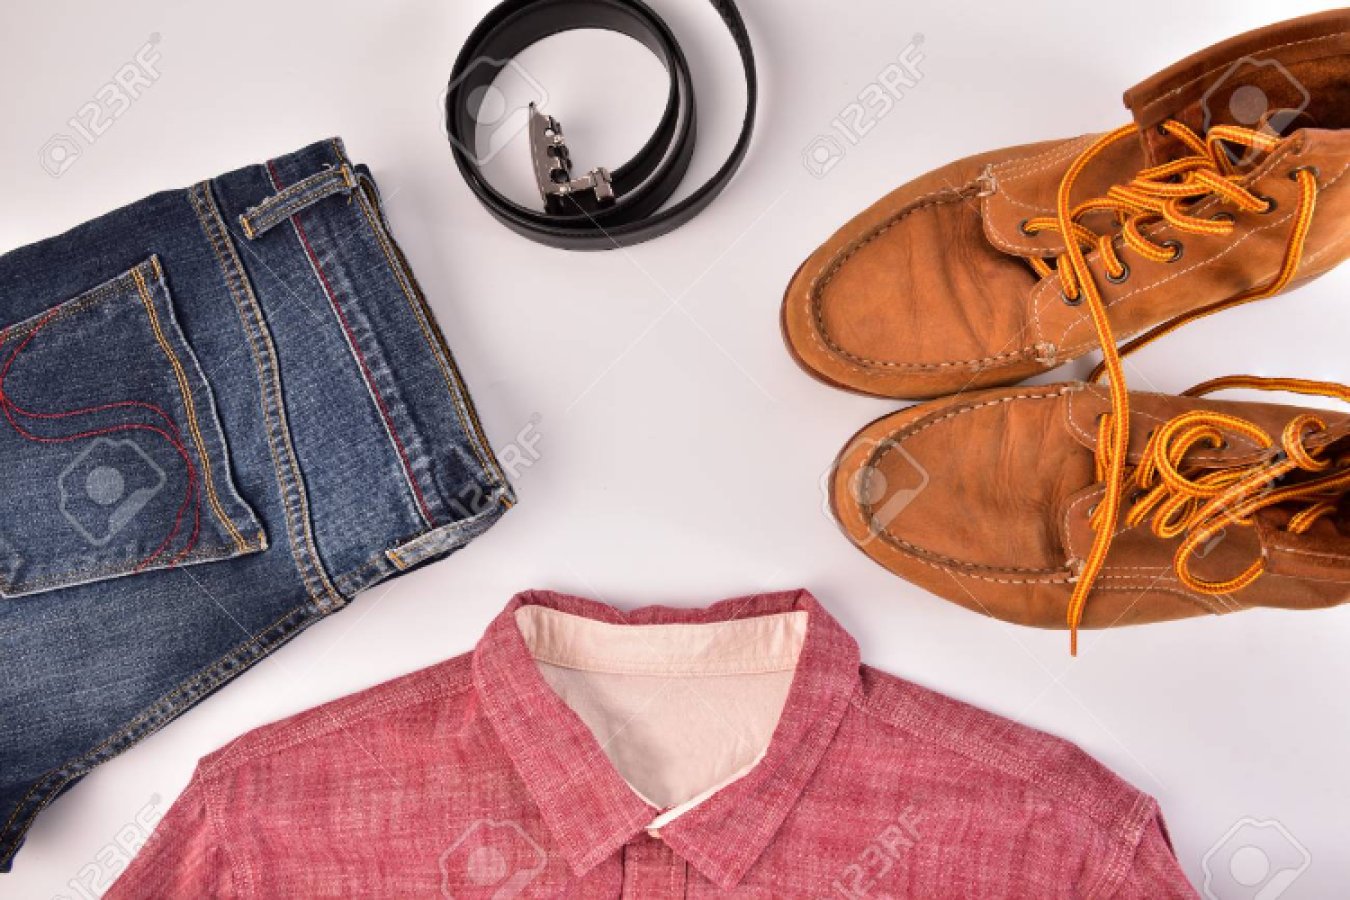 Understanding smart casual outfits and how to personalize them